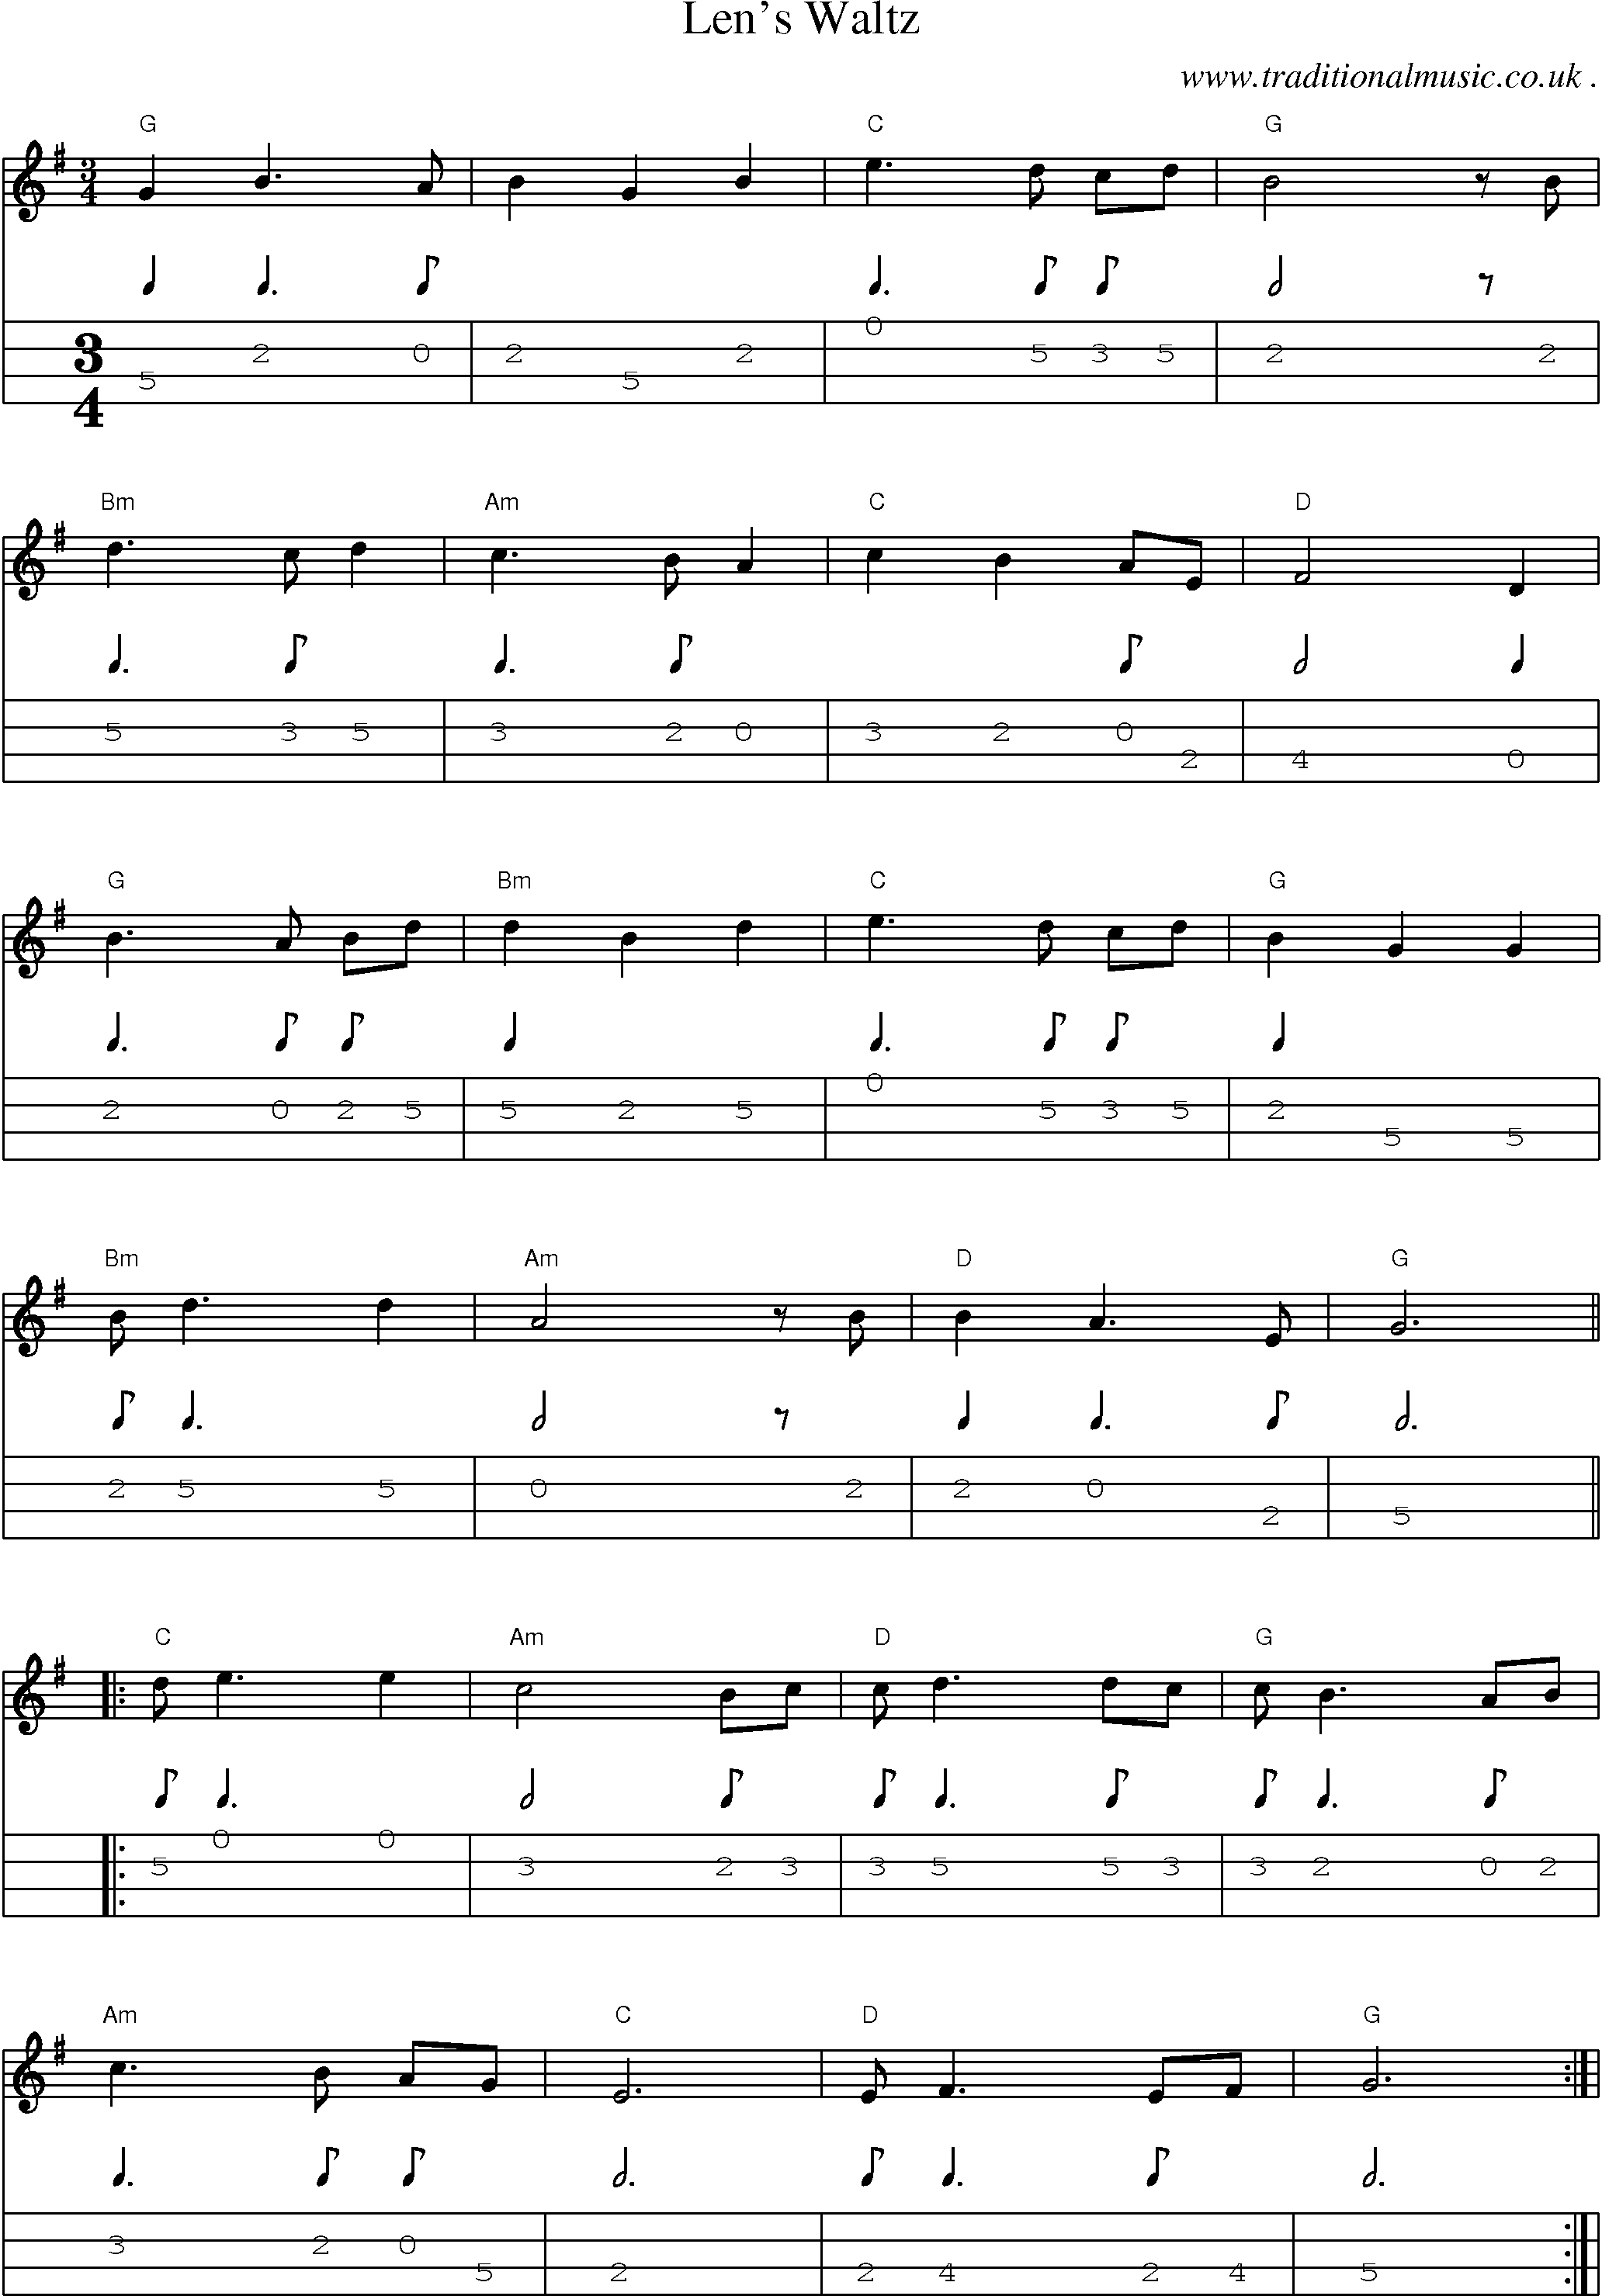 Music Score and Guitar Tabs for Lens Waltz